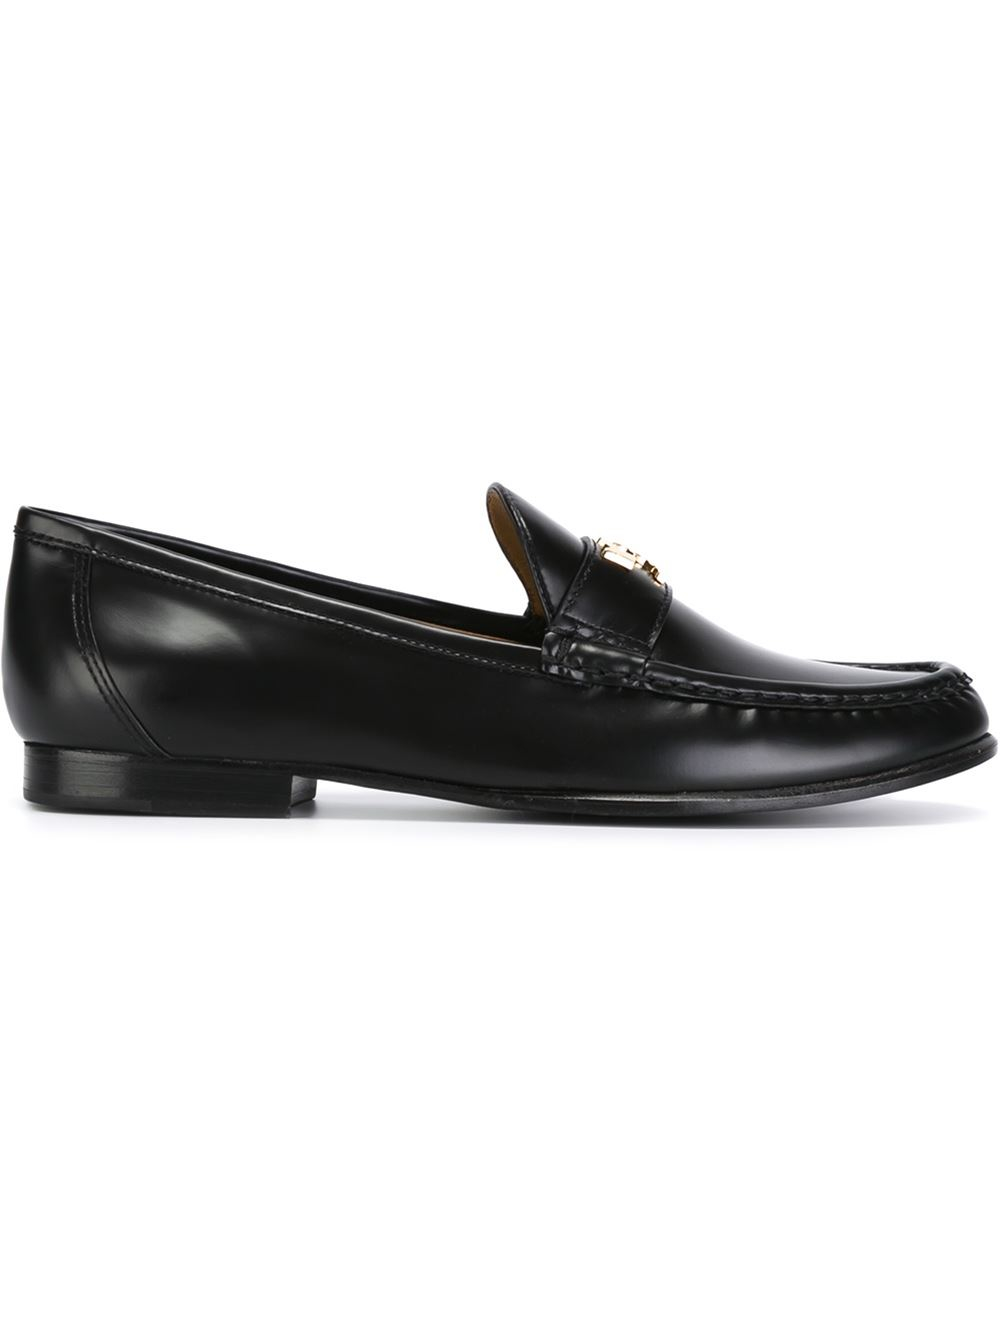 Tory burch 'townsend' Loafers in Black | Lyst